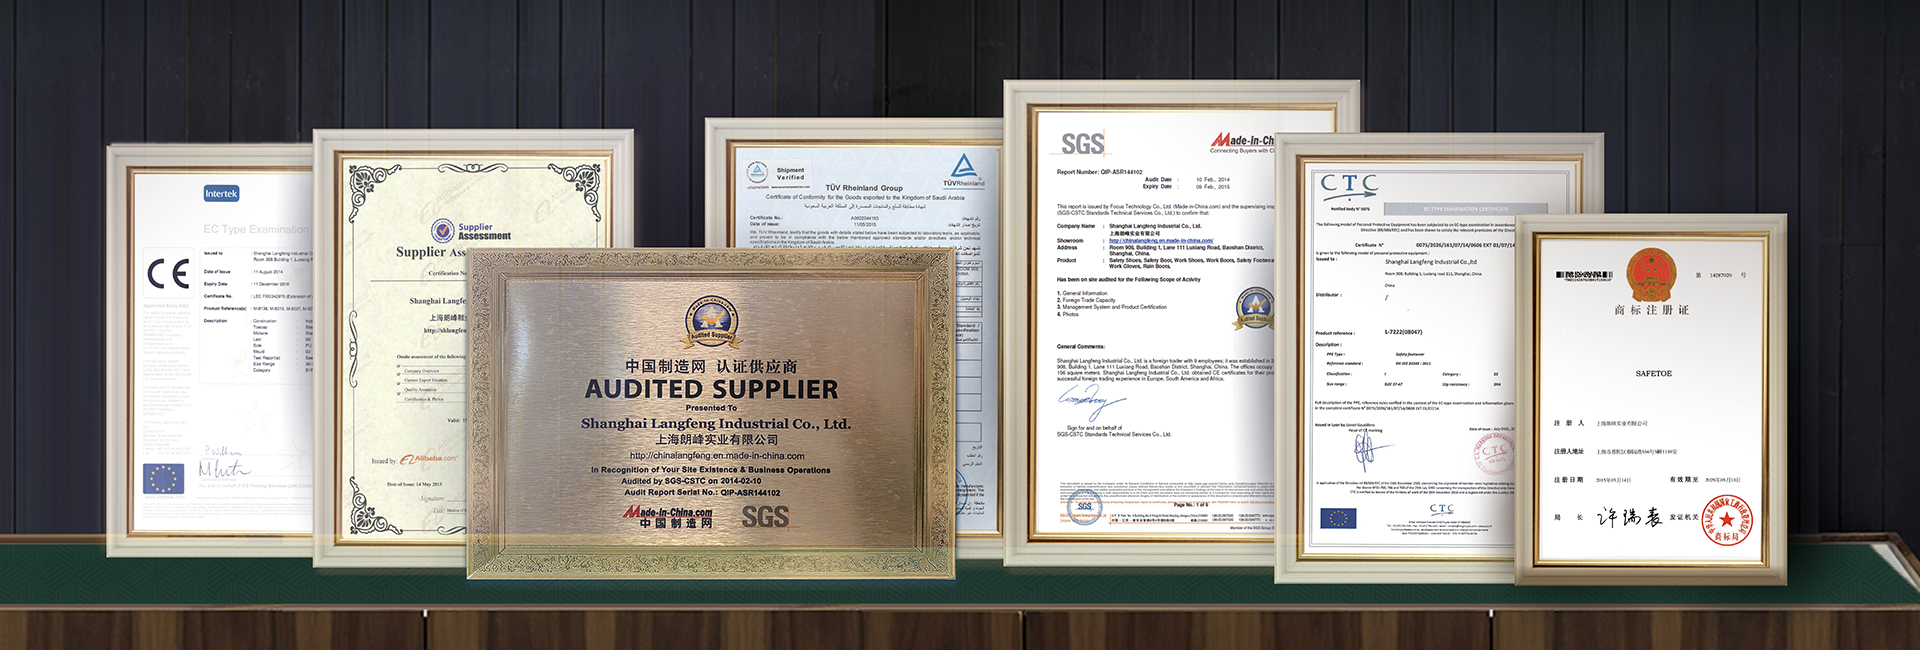 PRODUCT CERTIFICATE 